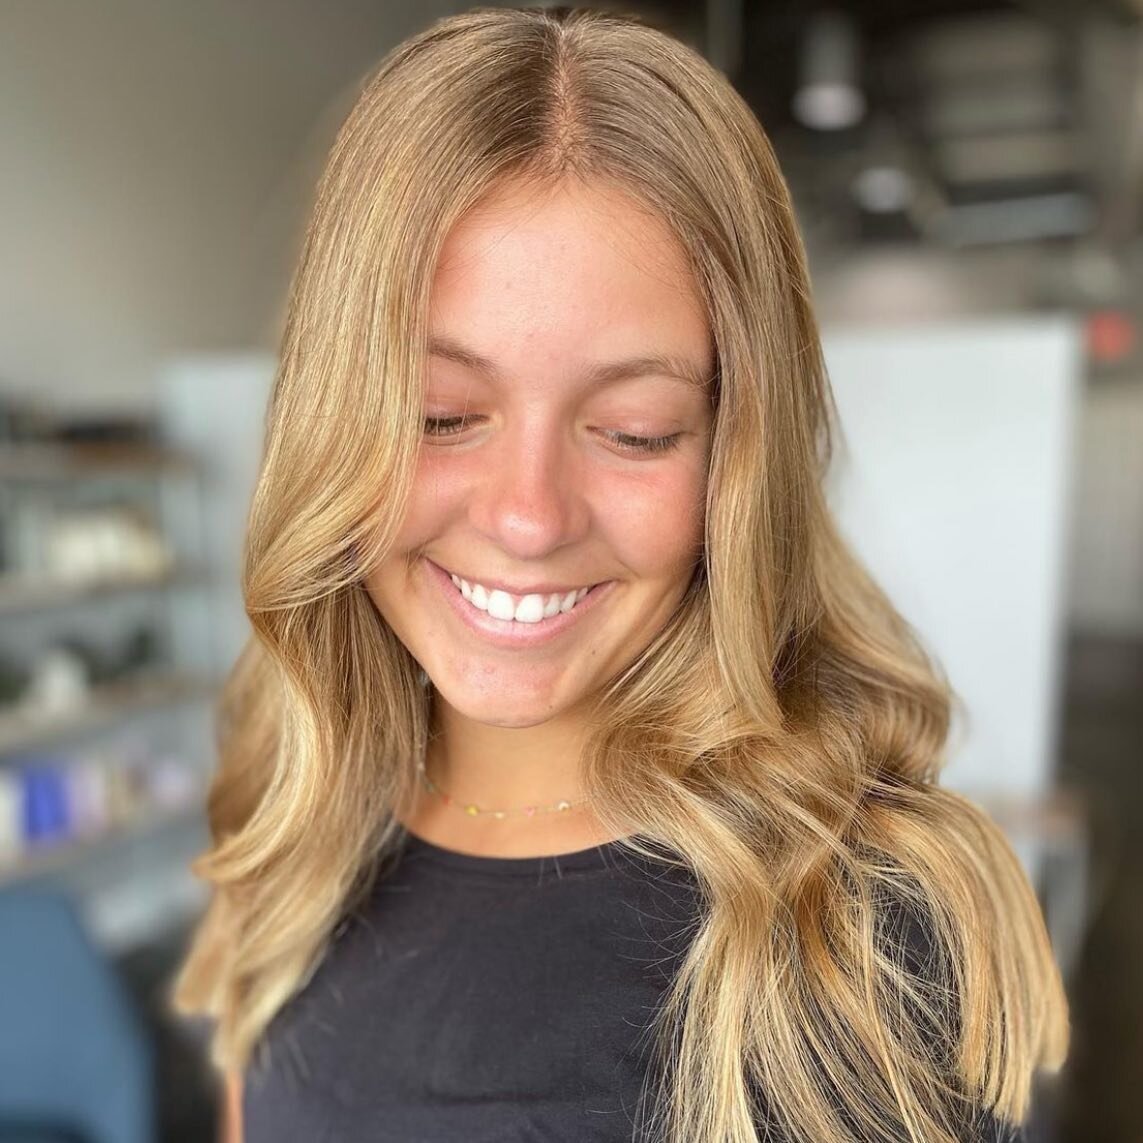 Sweet Summertime☀️ loving this sunny blonde by Angela at our wildwood location